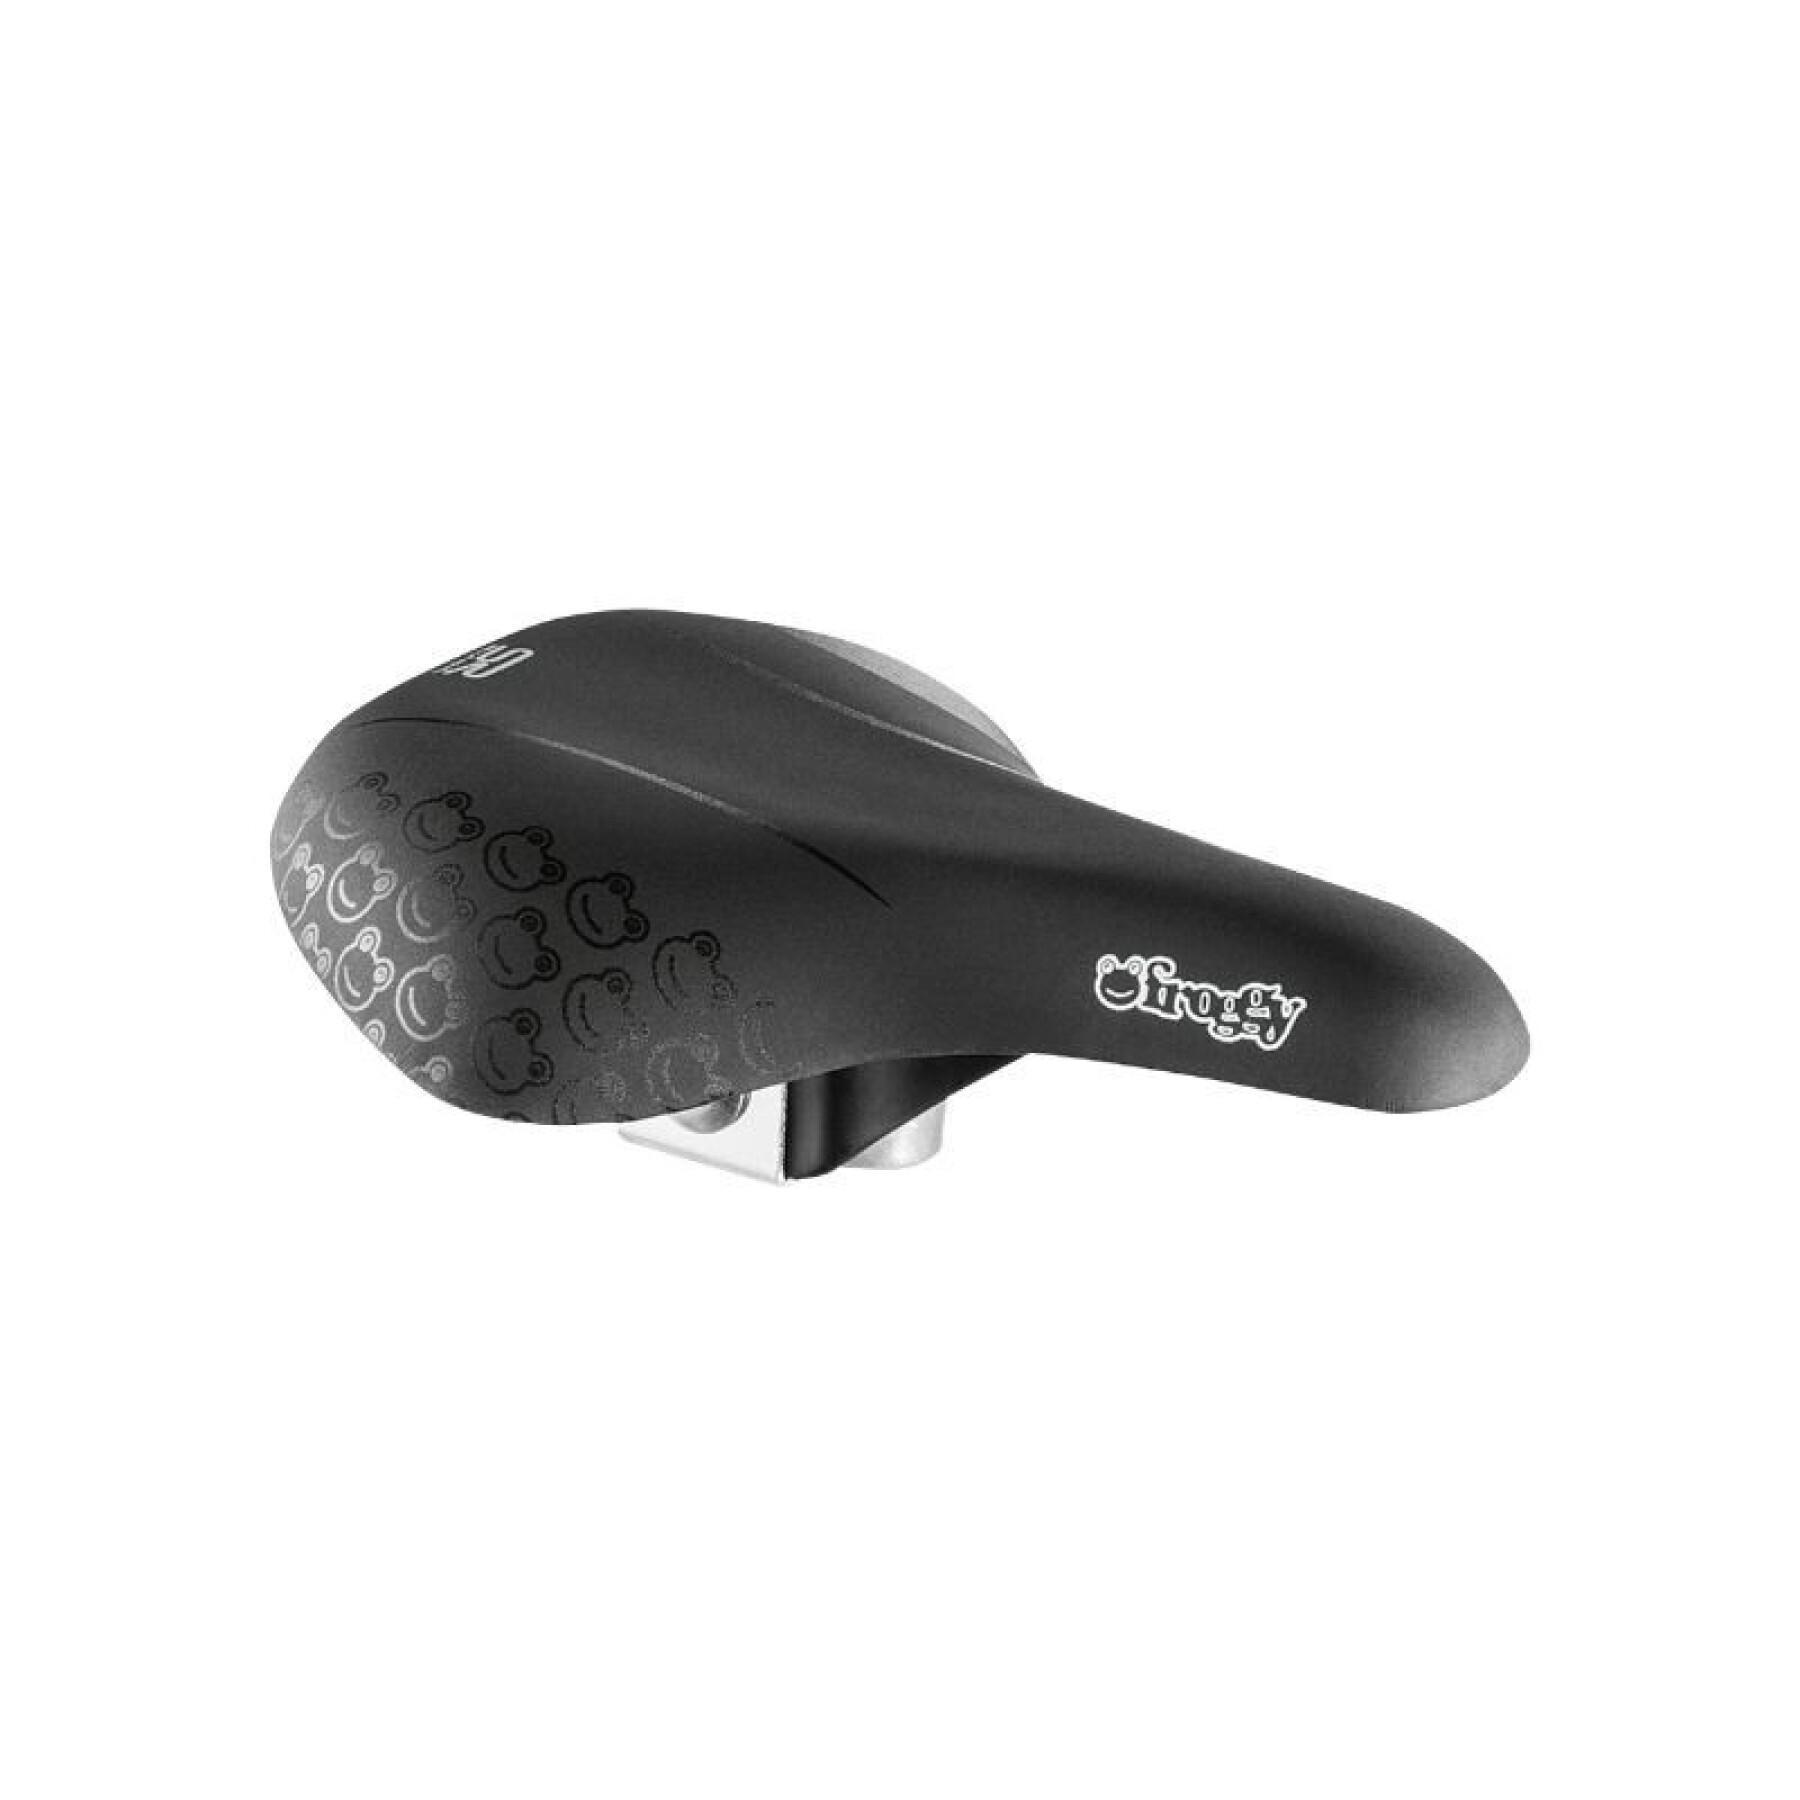 Child saddle Selle Saddles components - Peripheral Froggy - Spare parts - Royal